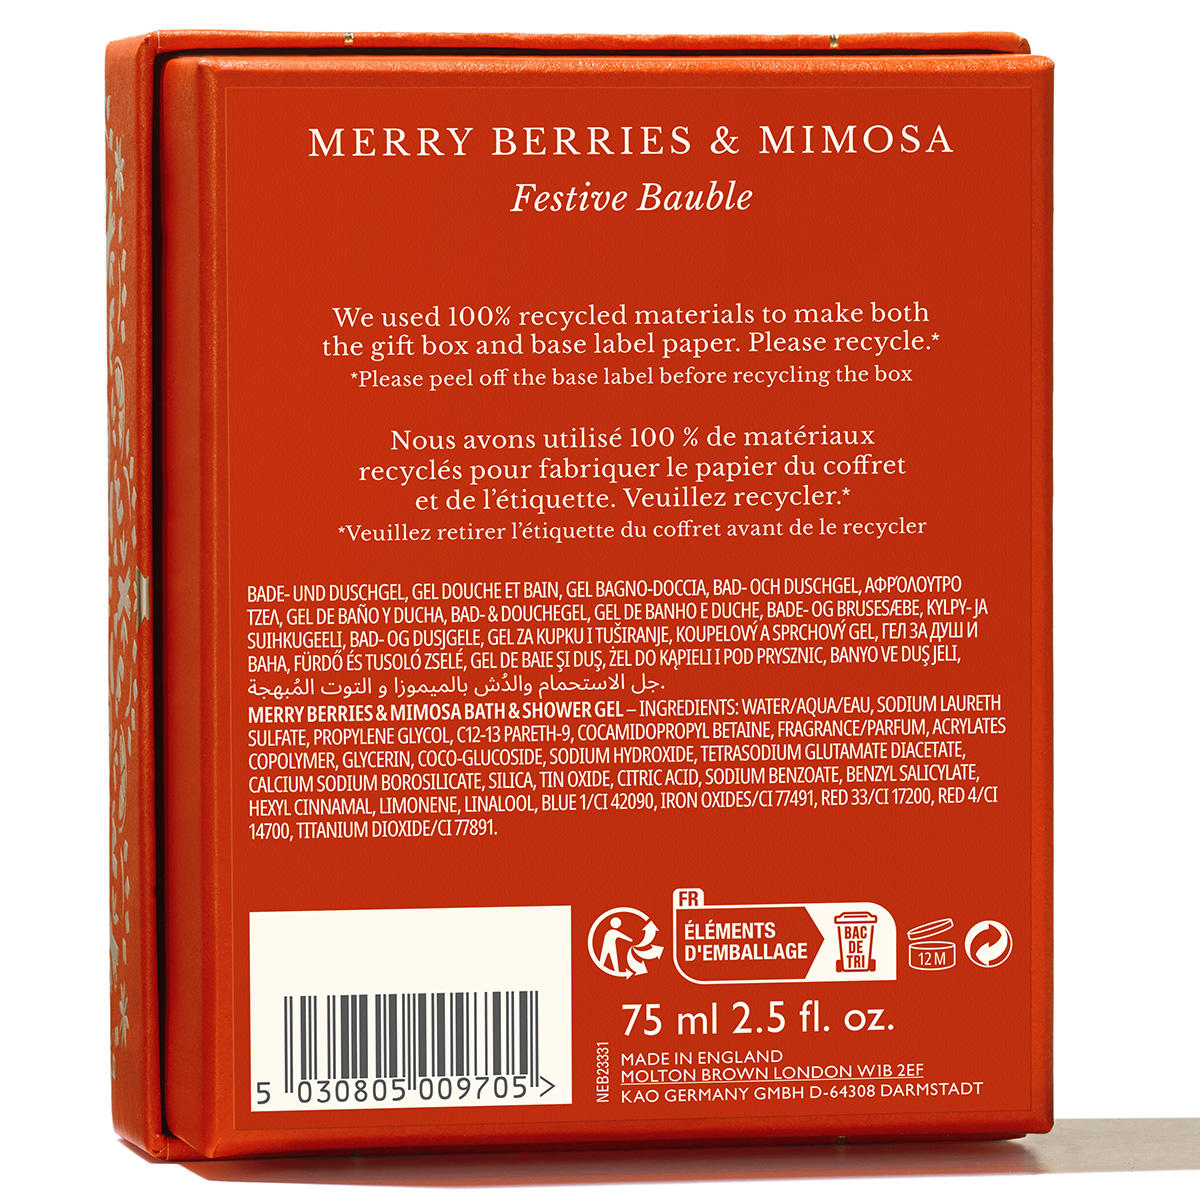 MOLTON BROWN Merry Berries & Mimosa Festive Bauble 75 ml - 4